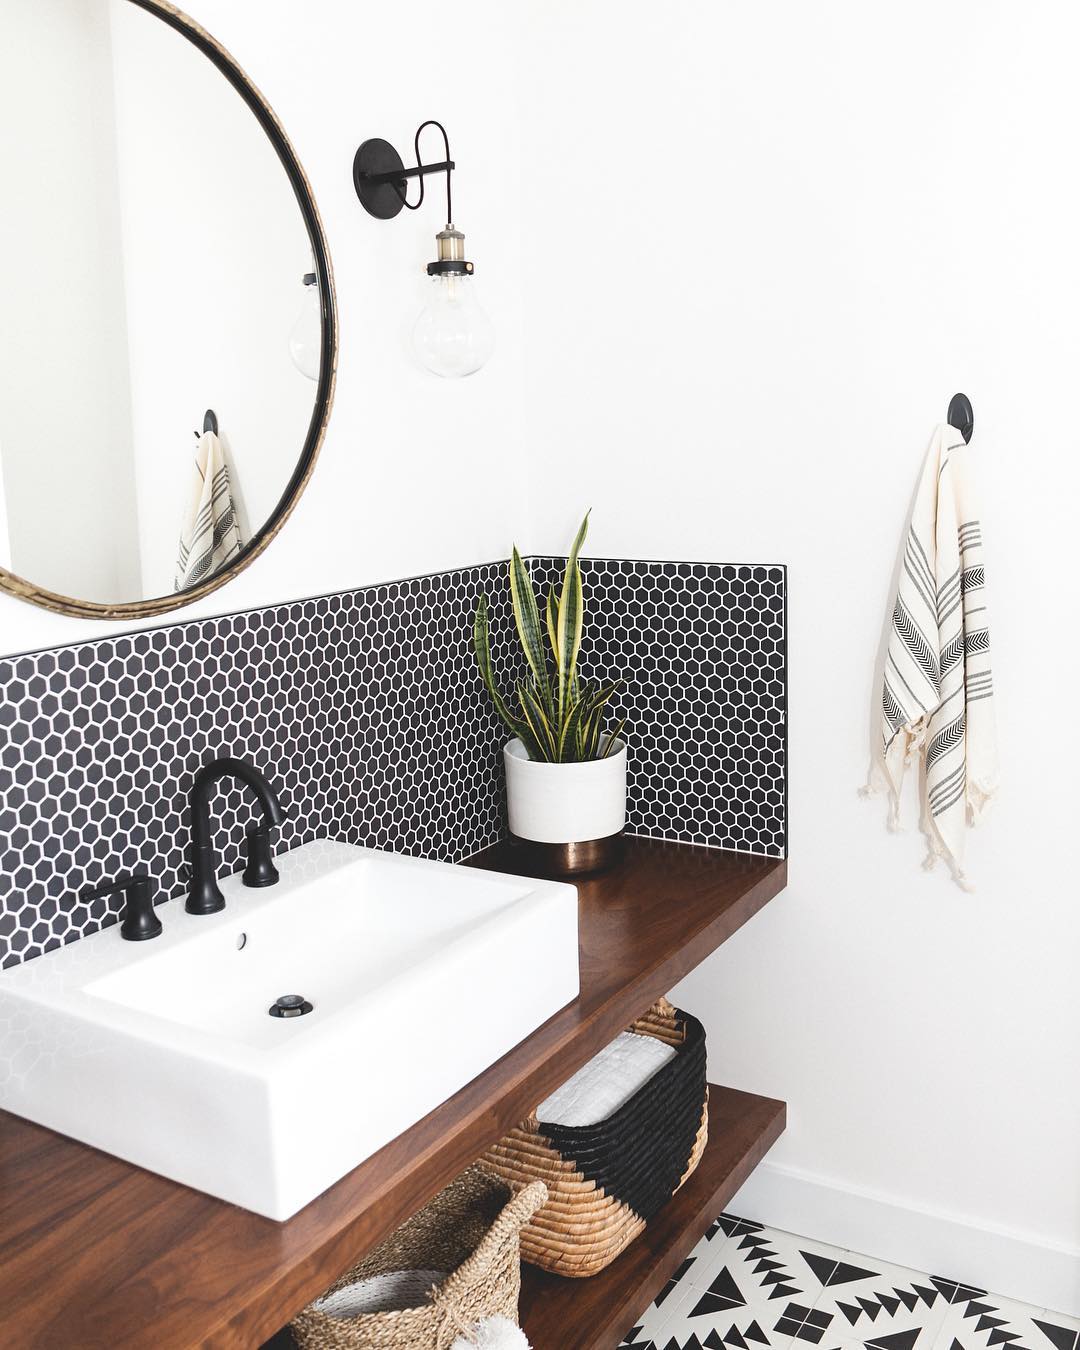 black tile backsplash with white sink and wooden counter in bathroom photo by Instagram user @theresidencybureau